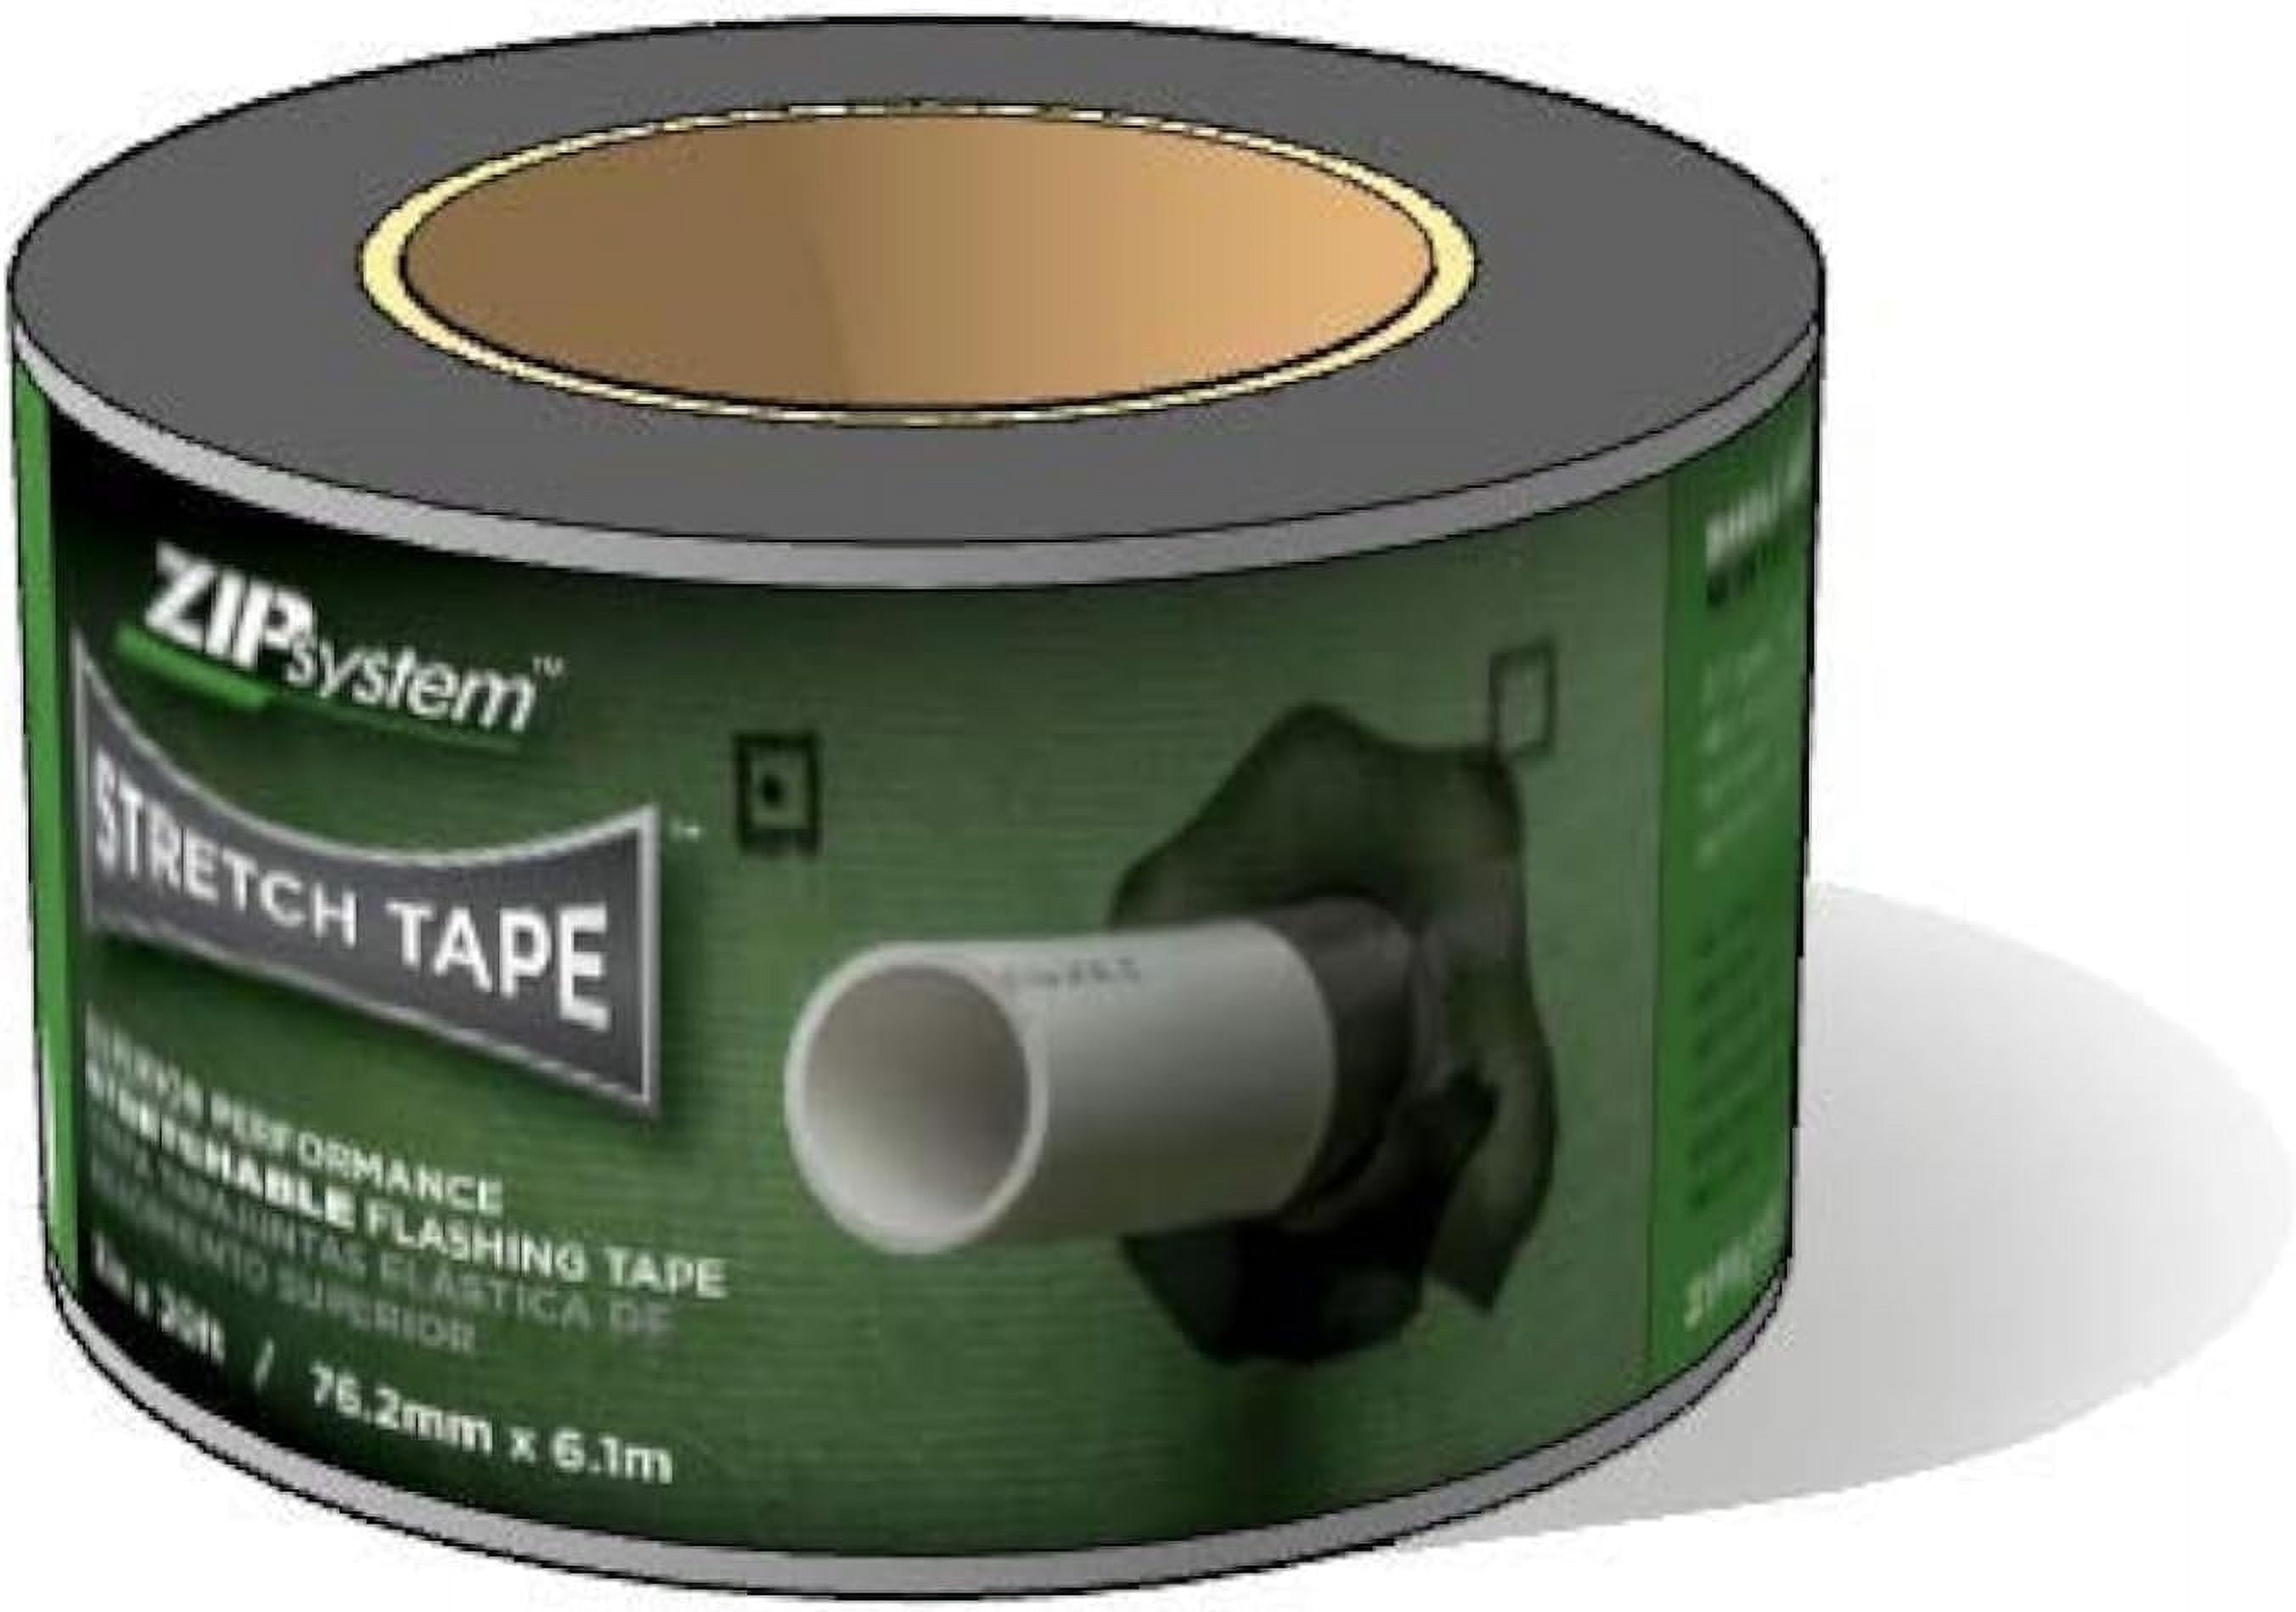 Huber 10 in. x 75 ft Zip System Stretch Self-Adhesive Tape